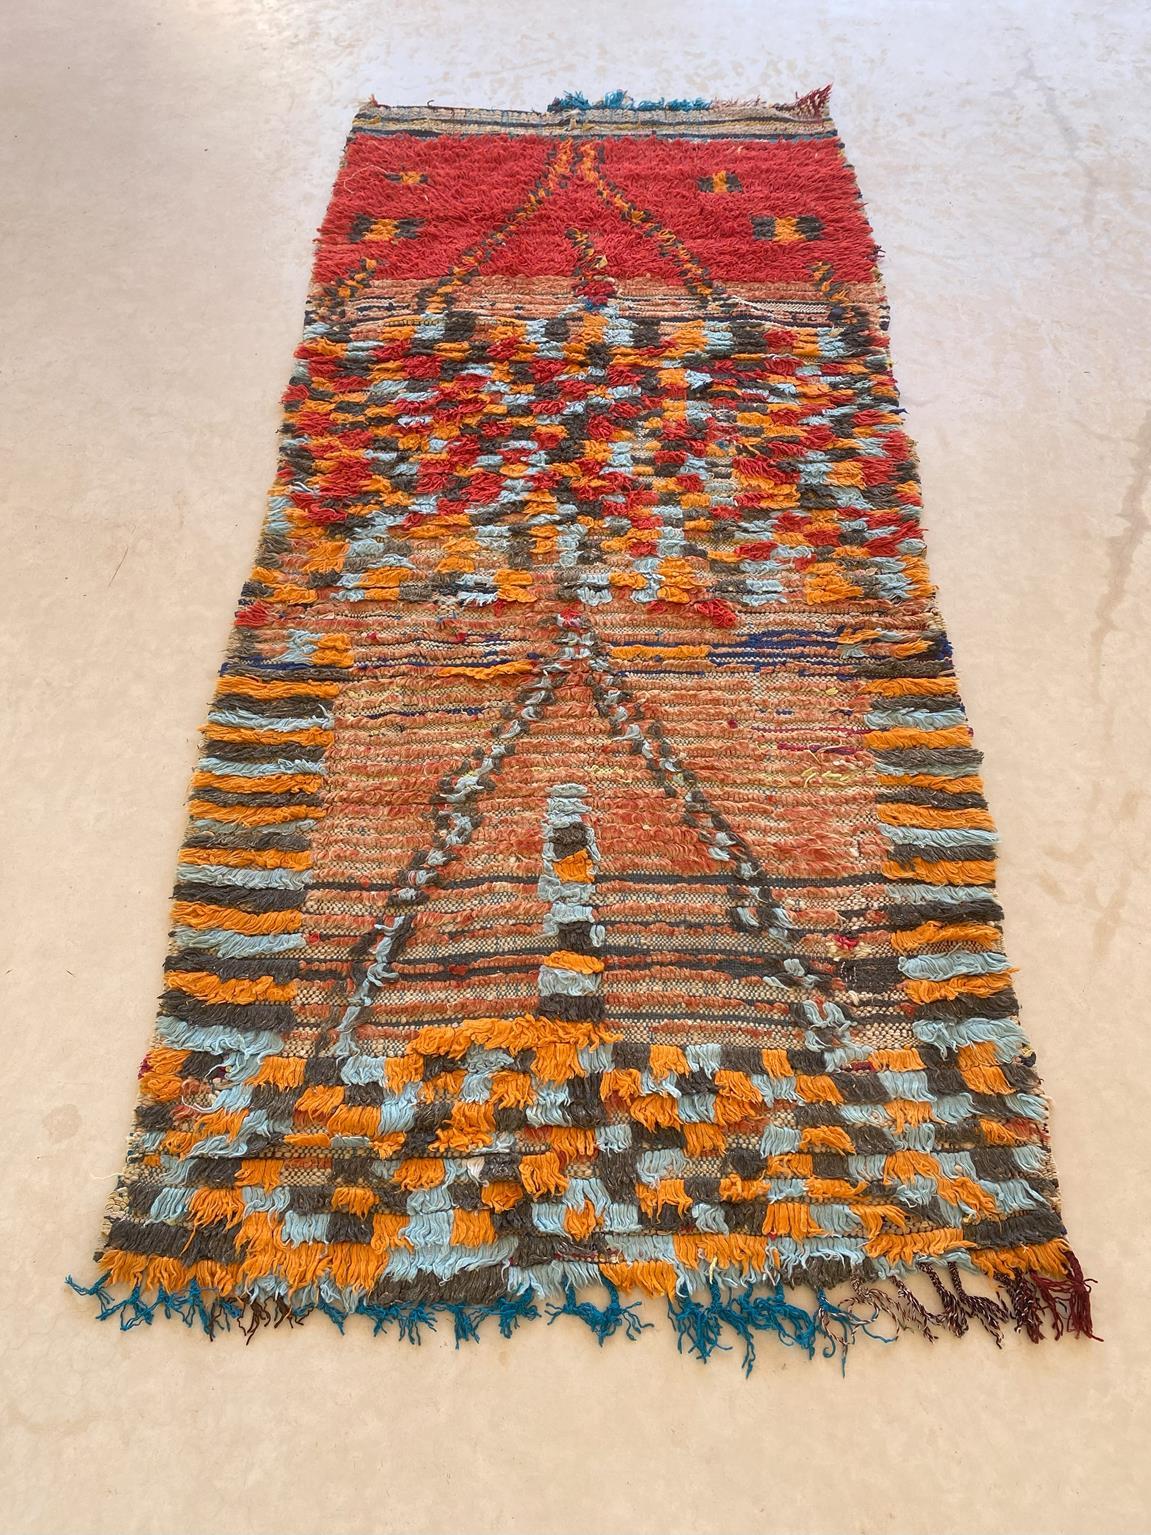 Vintage Moroccan Boujad rug - Red/black/orange/blue - 3.4x7.5feet / 106x230cm In Good Condition For Sale In Marrakech, MA